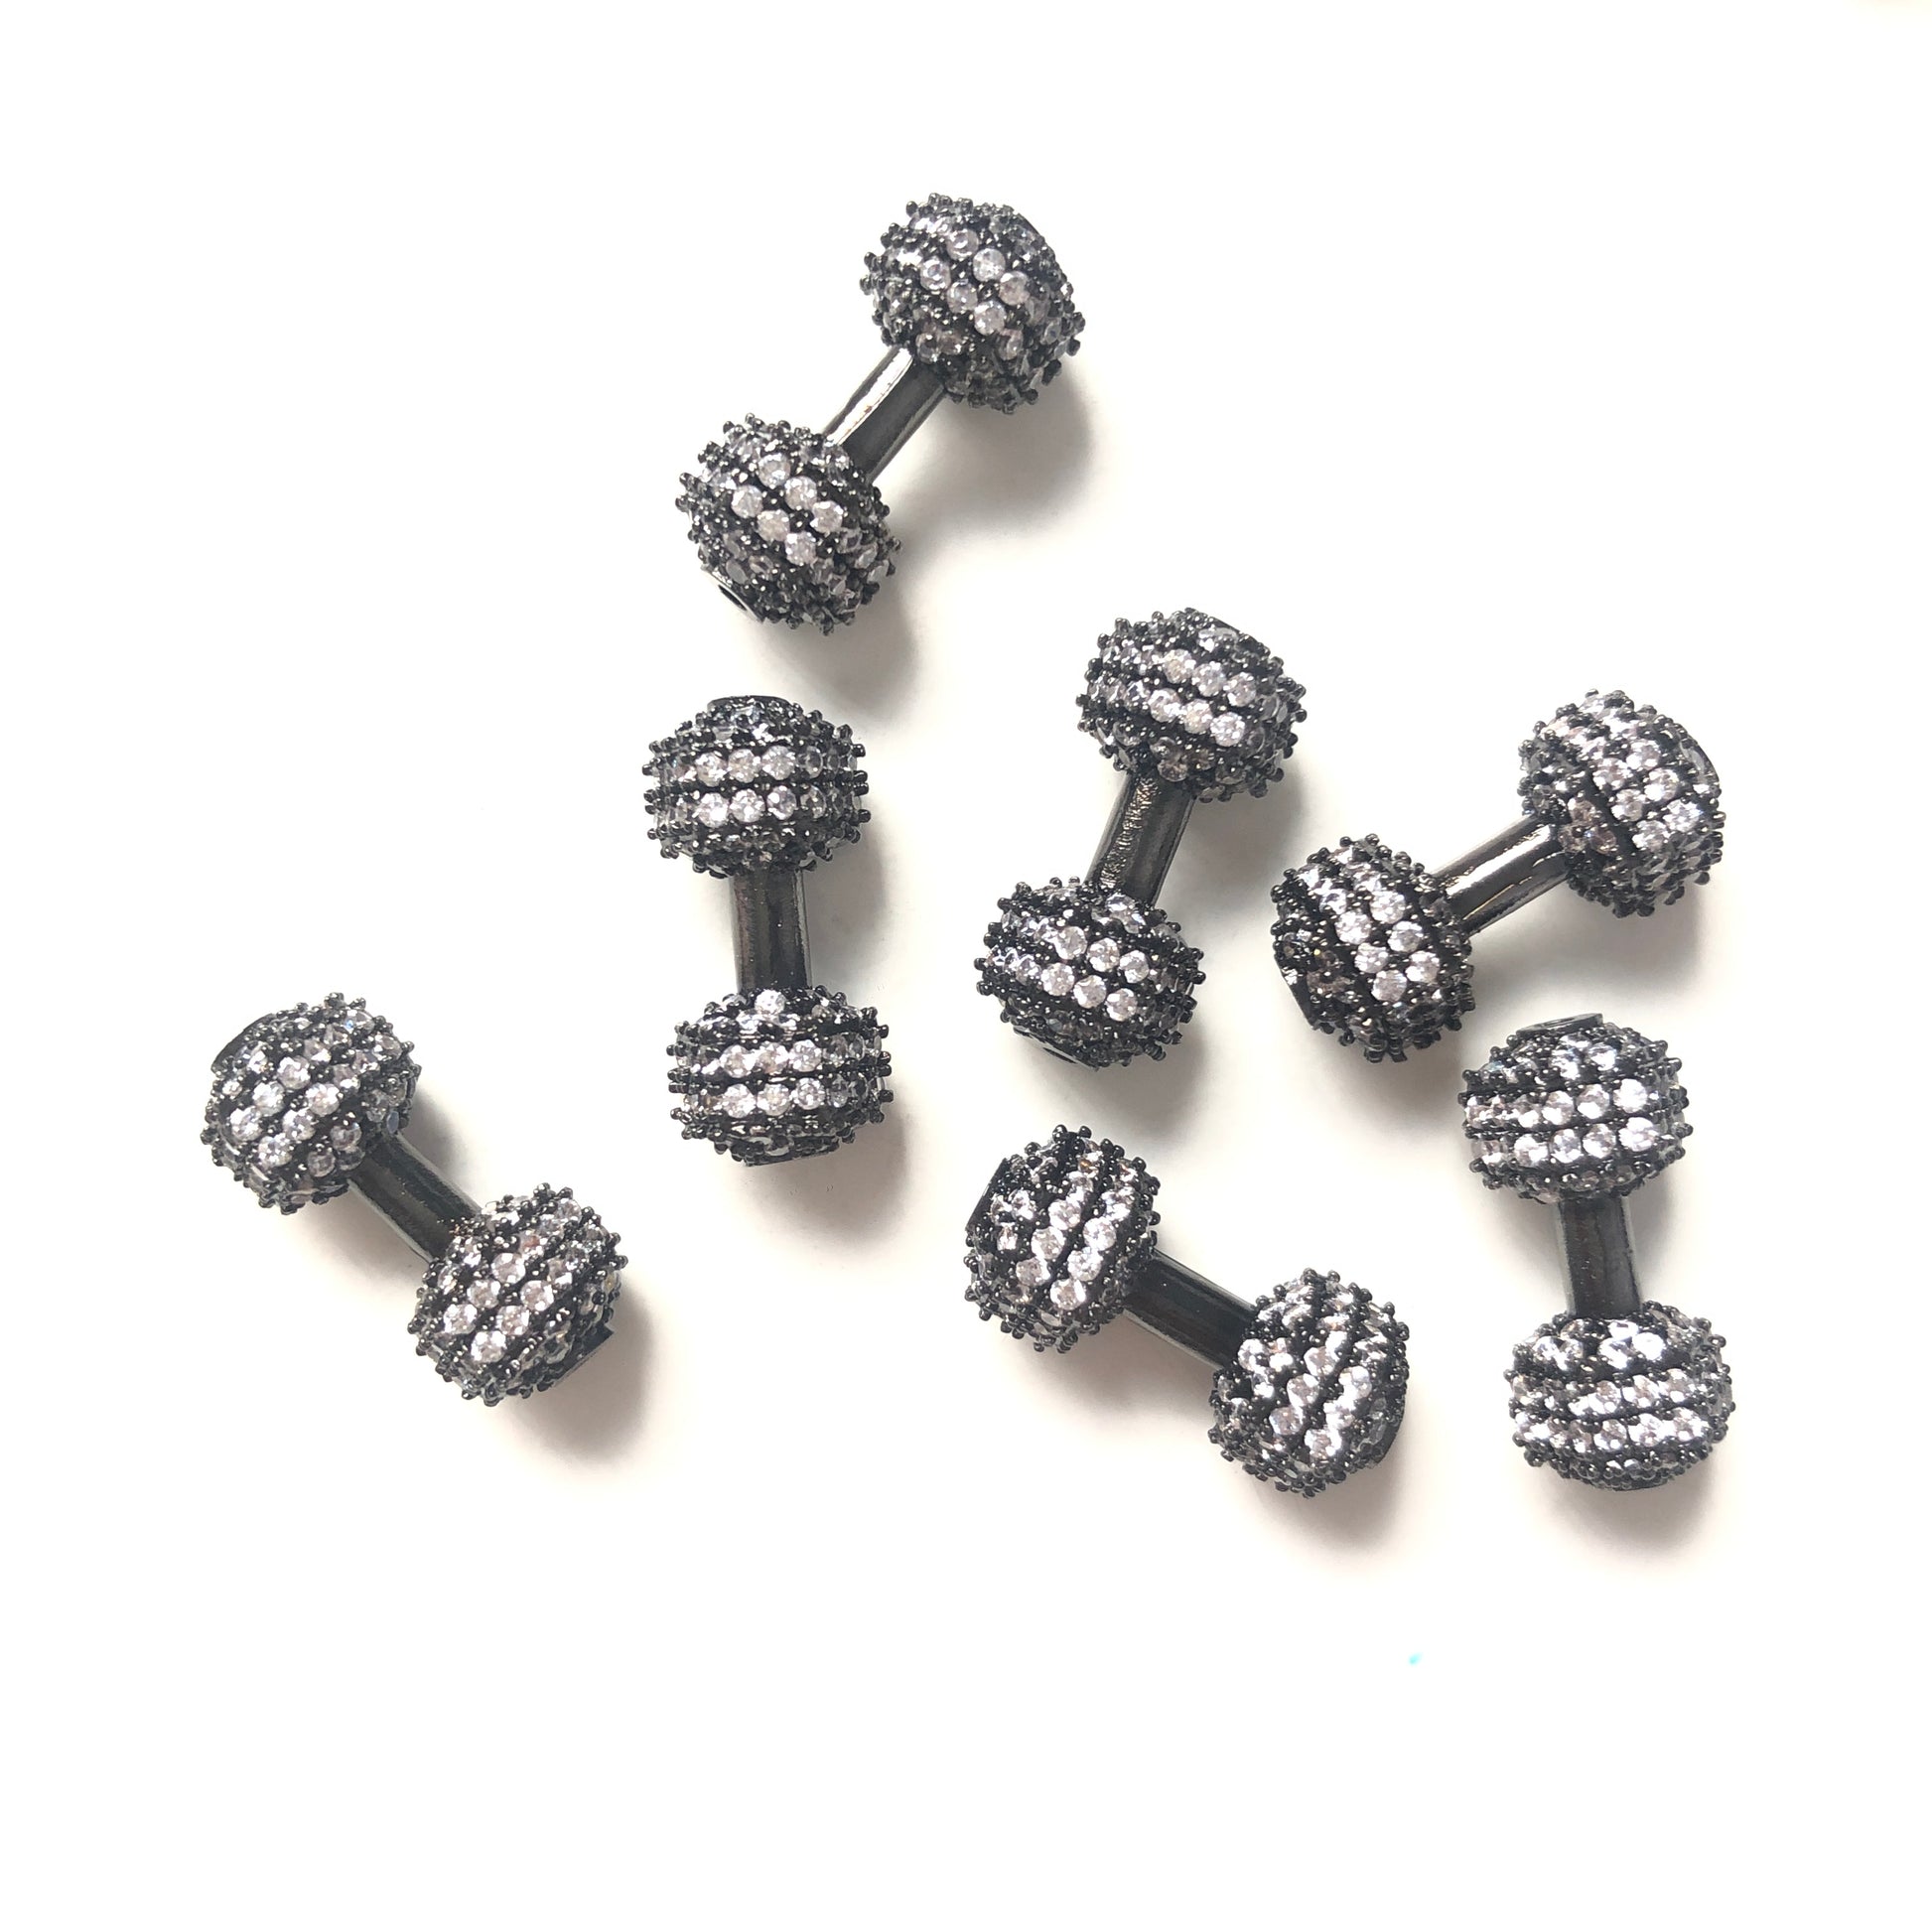 10pcs/lot 18*7.8mm CZ Paved Dumbbell Spacers Black CZ Paved Spacers Charms Beads Beyond